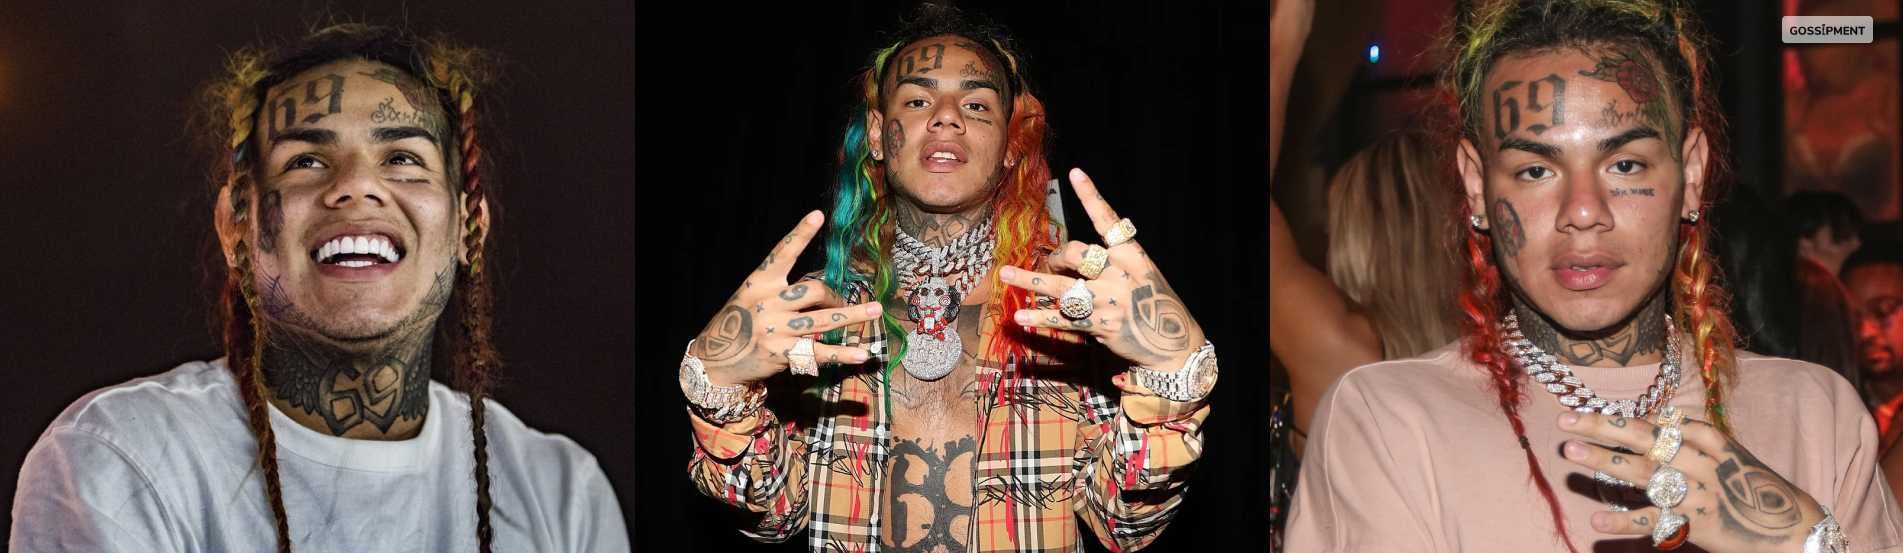 Cover Image for 6ix9ine Net Worth: How Rich Is Tekashi69?